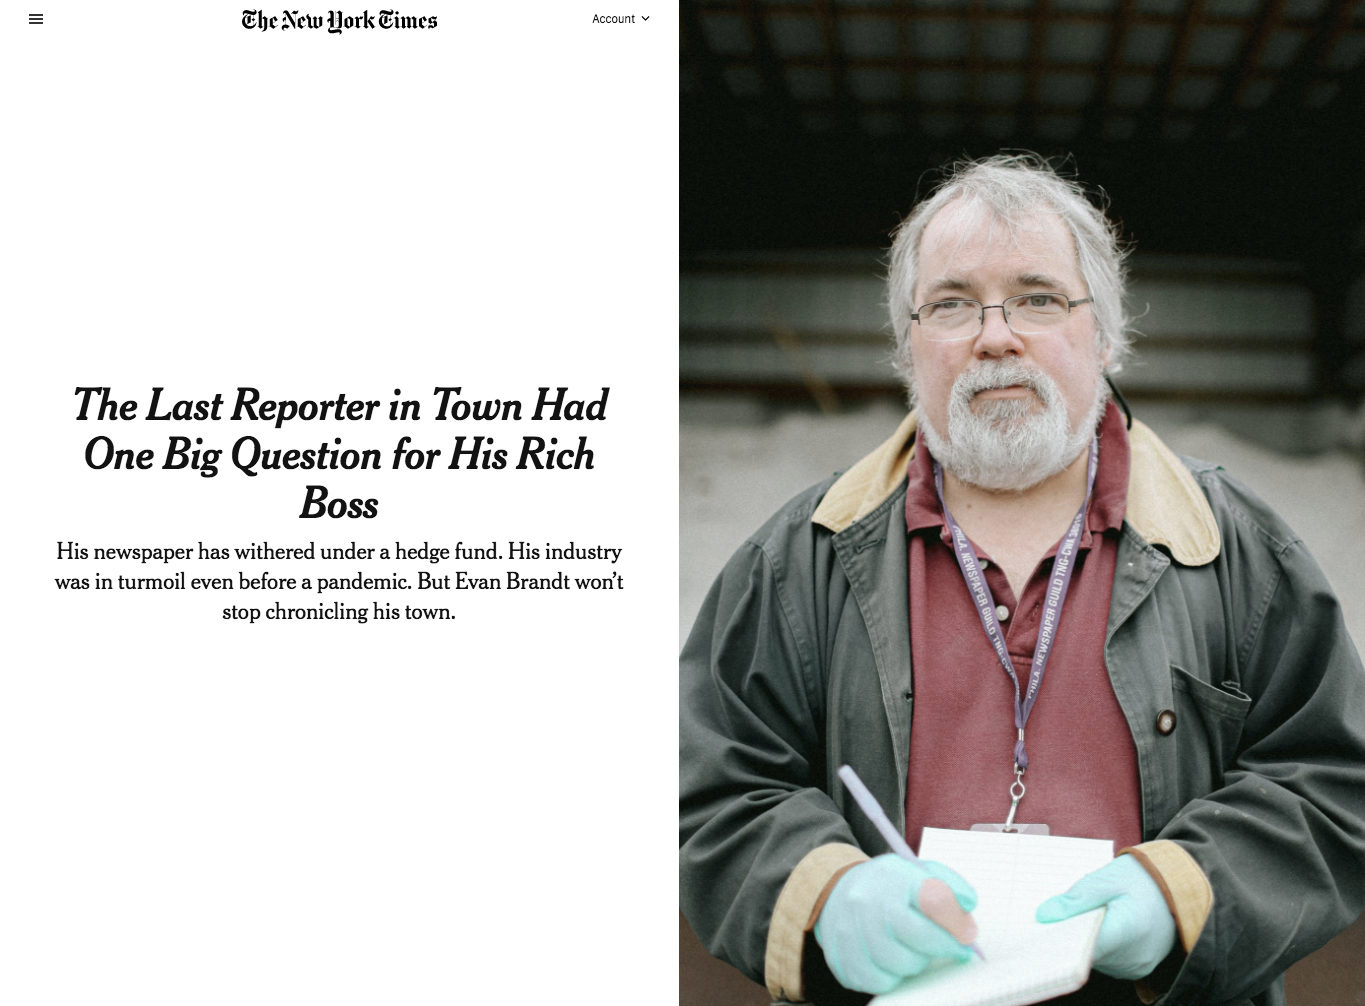 The Last Reporter in Town Had One Big Question for his Rich Boss